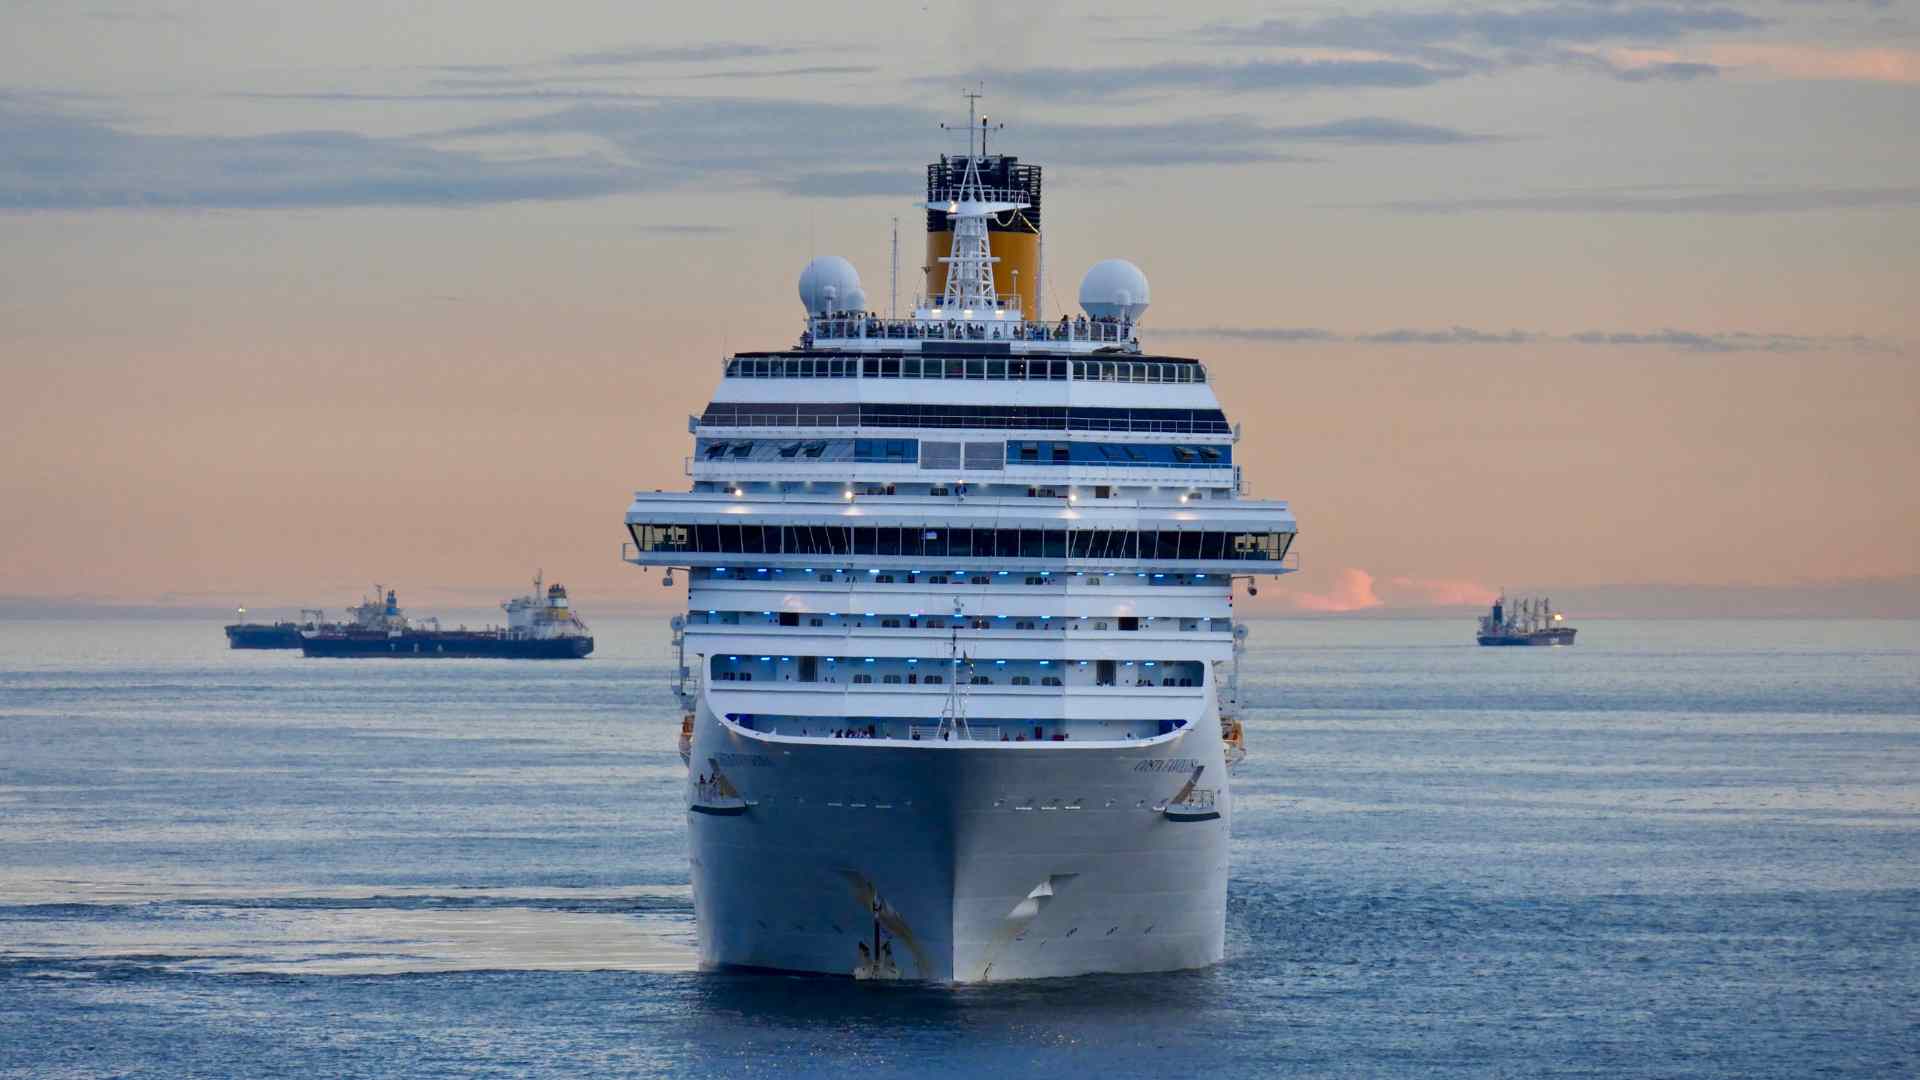 Factors Influencing Cruise Length